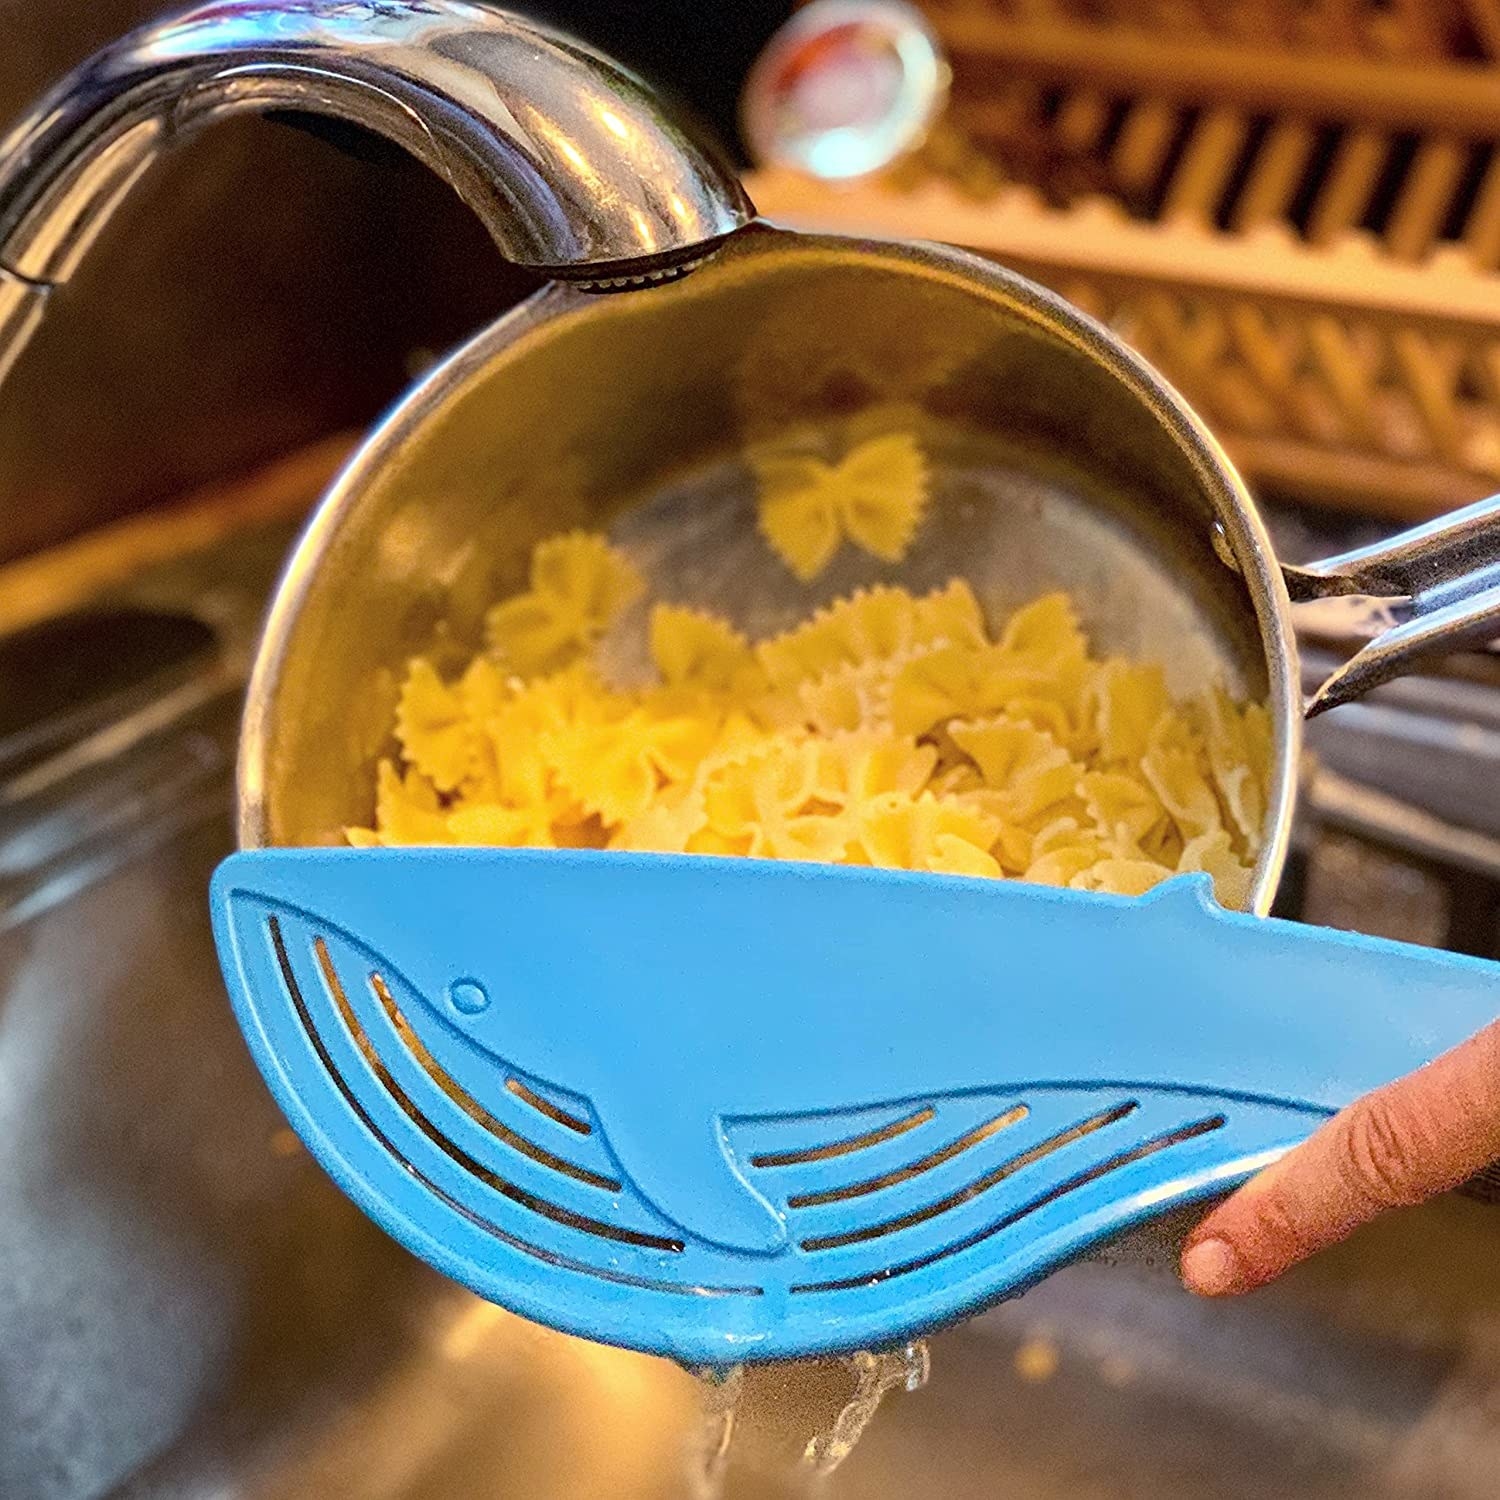 a person using the whale shaped strainer to drain pasta